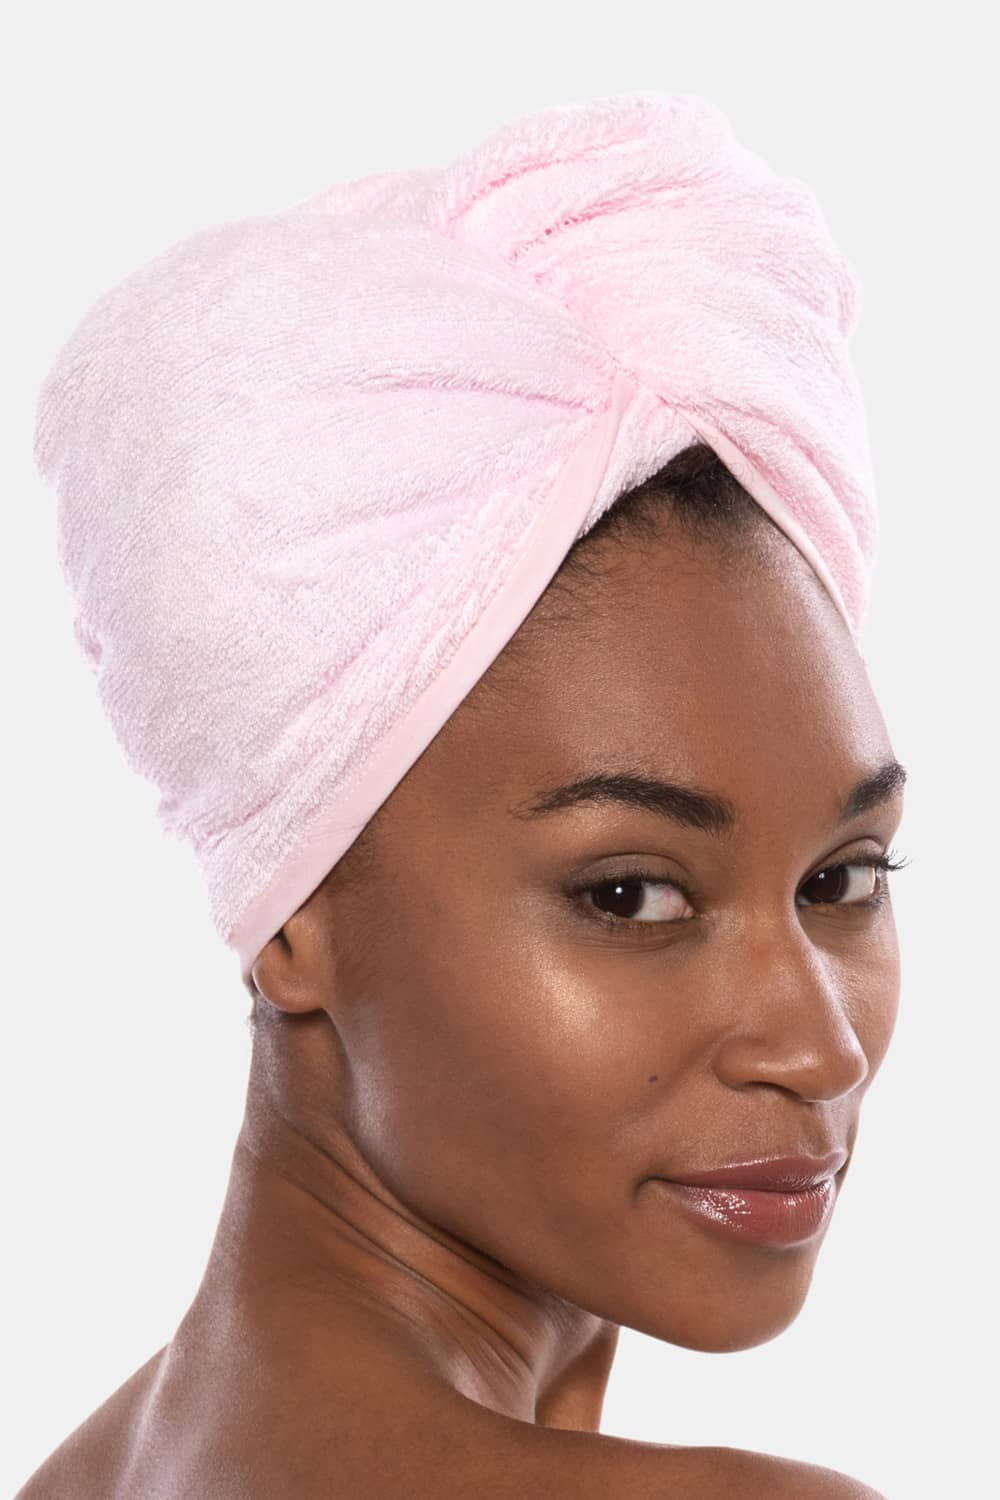 Texere Women's Terry Cloth Hair Towel / Wrap Womens>Spa>Hair Towel Fishers Finery Barely Pink 